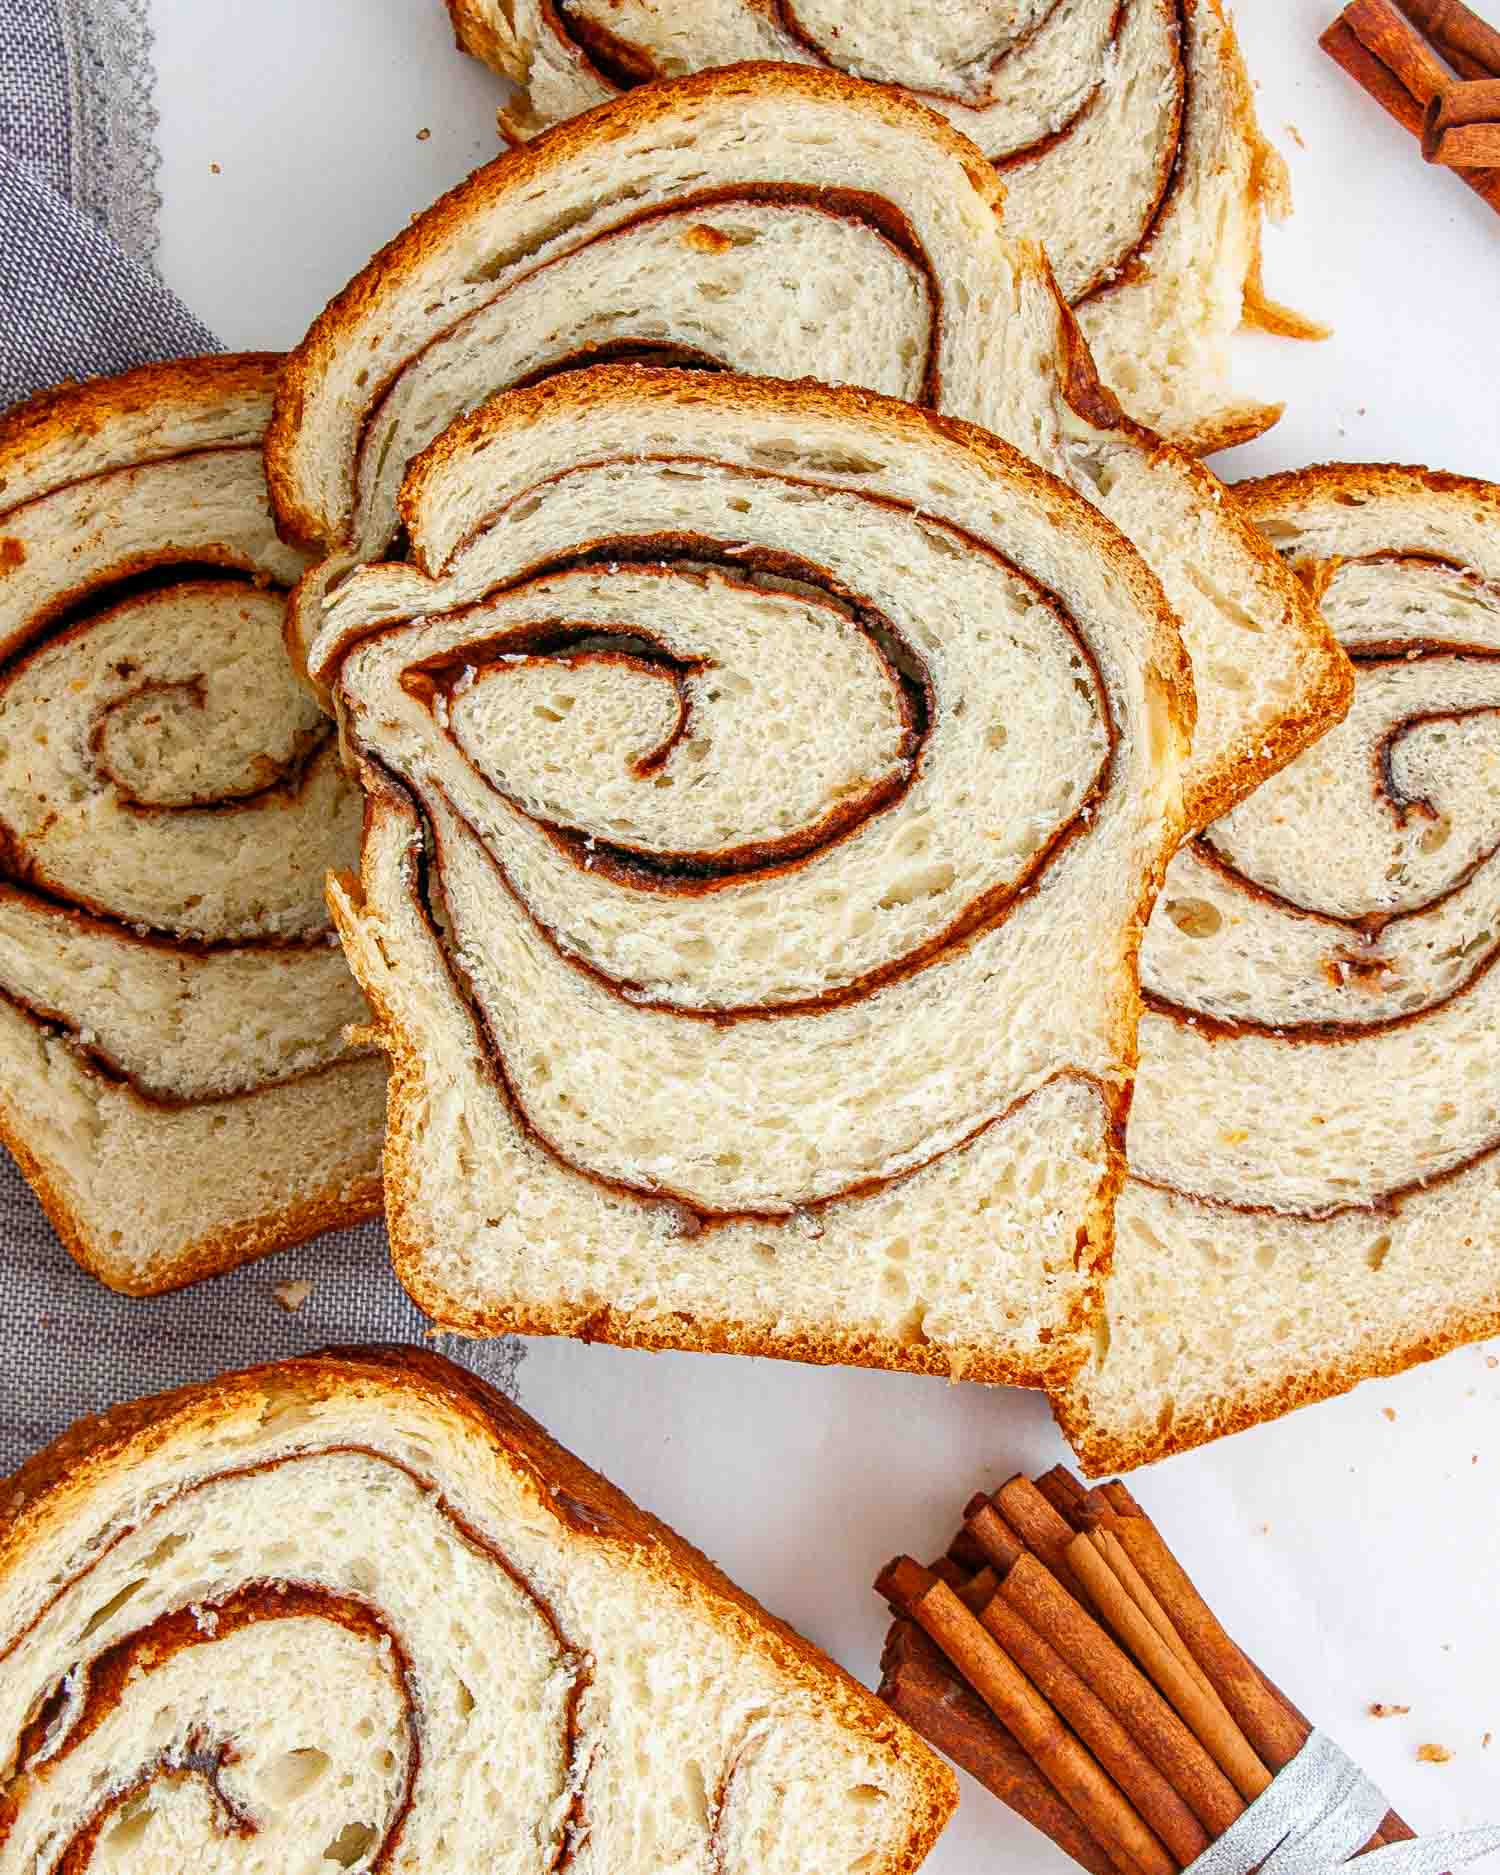 slices of cinnamon bread on a table.